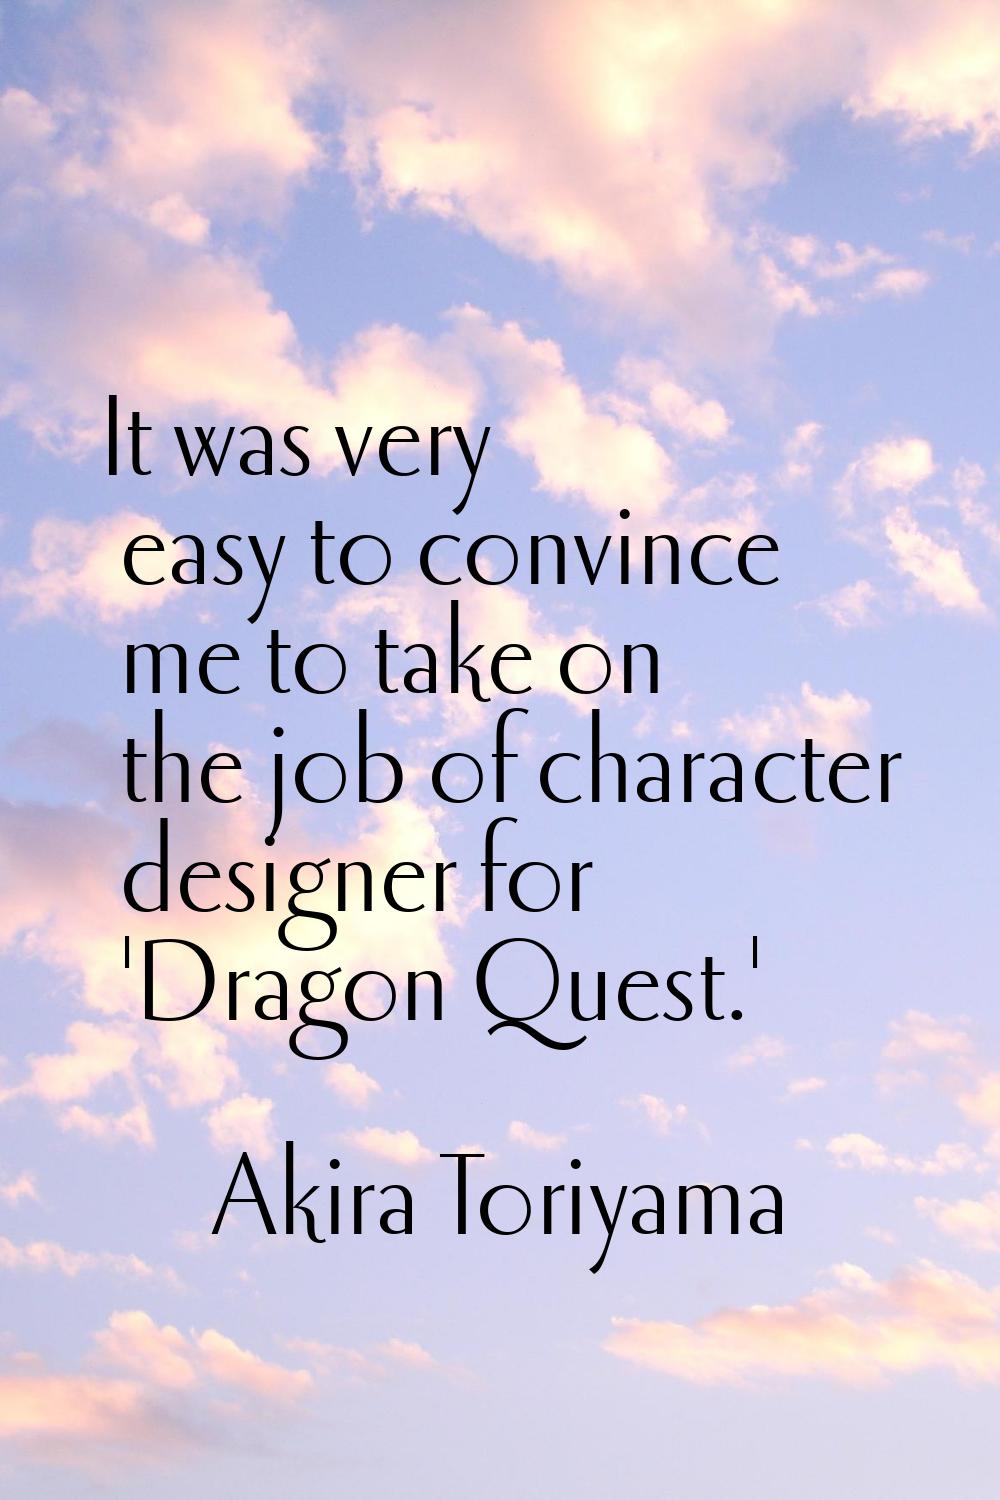 It was very easy to convince me to take on the job of character designer for 'Dragon Quest.'